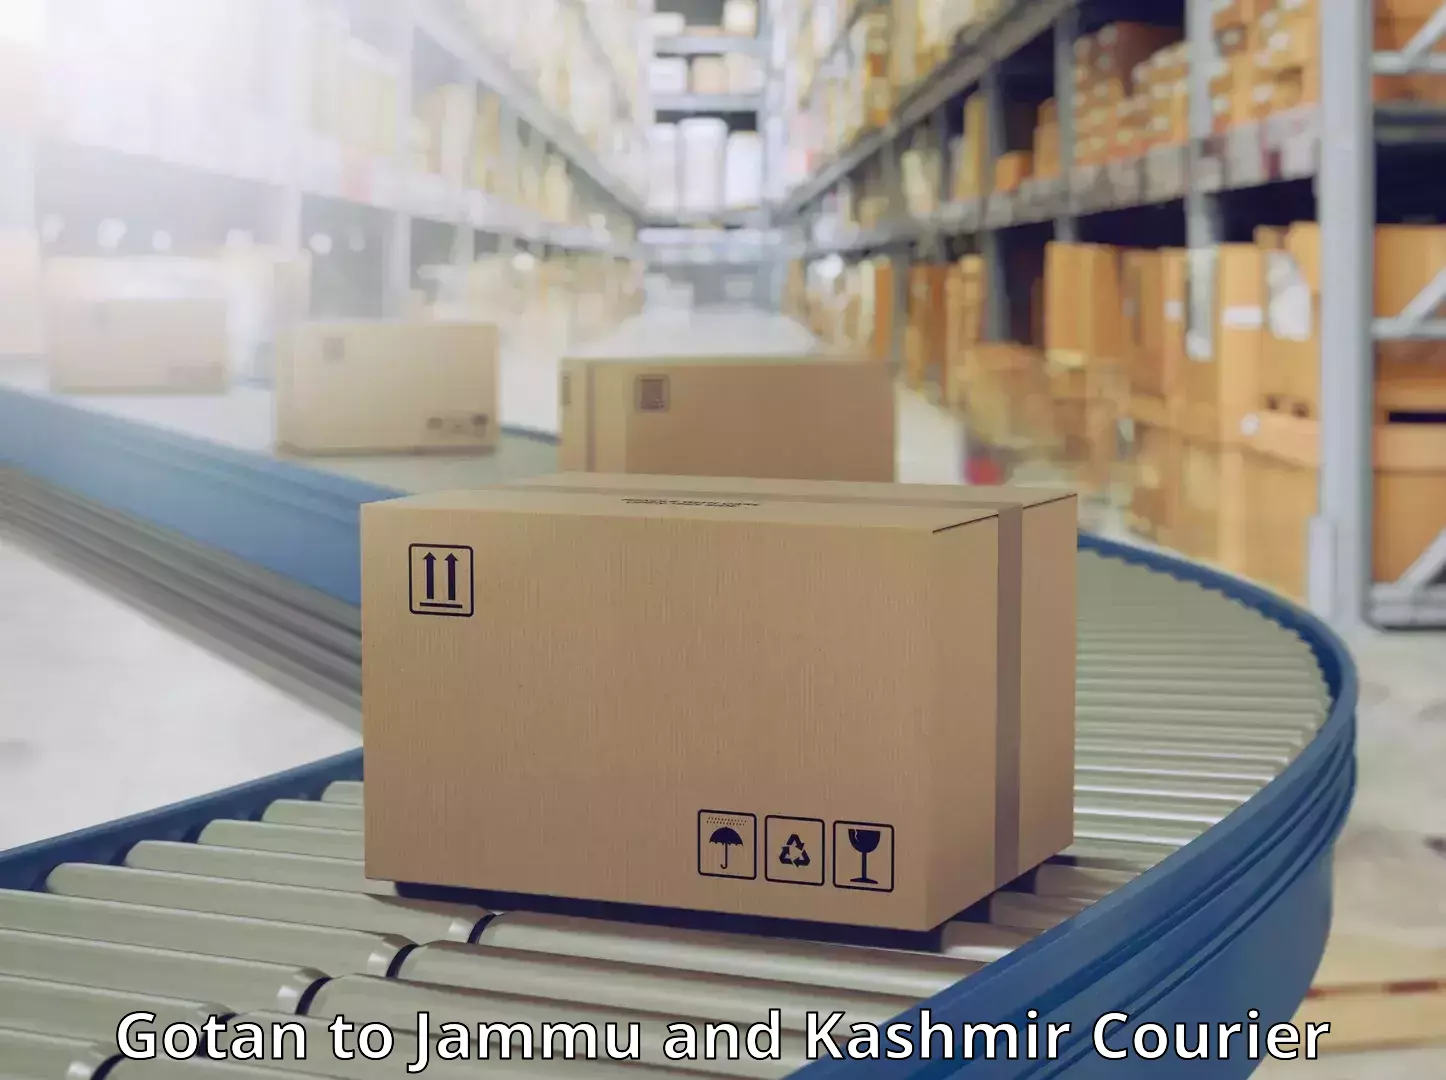 Multi-national courier services Gotan to Jammu and Kashmir